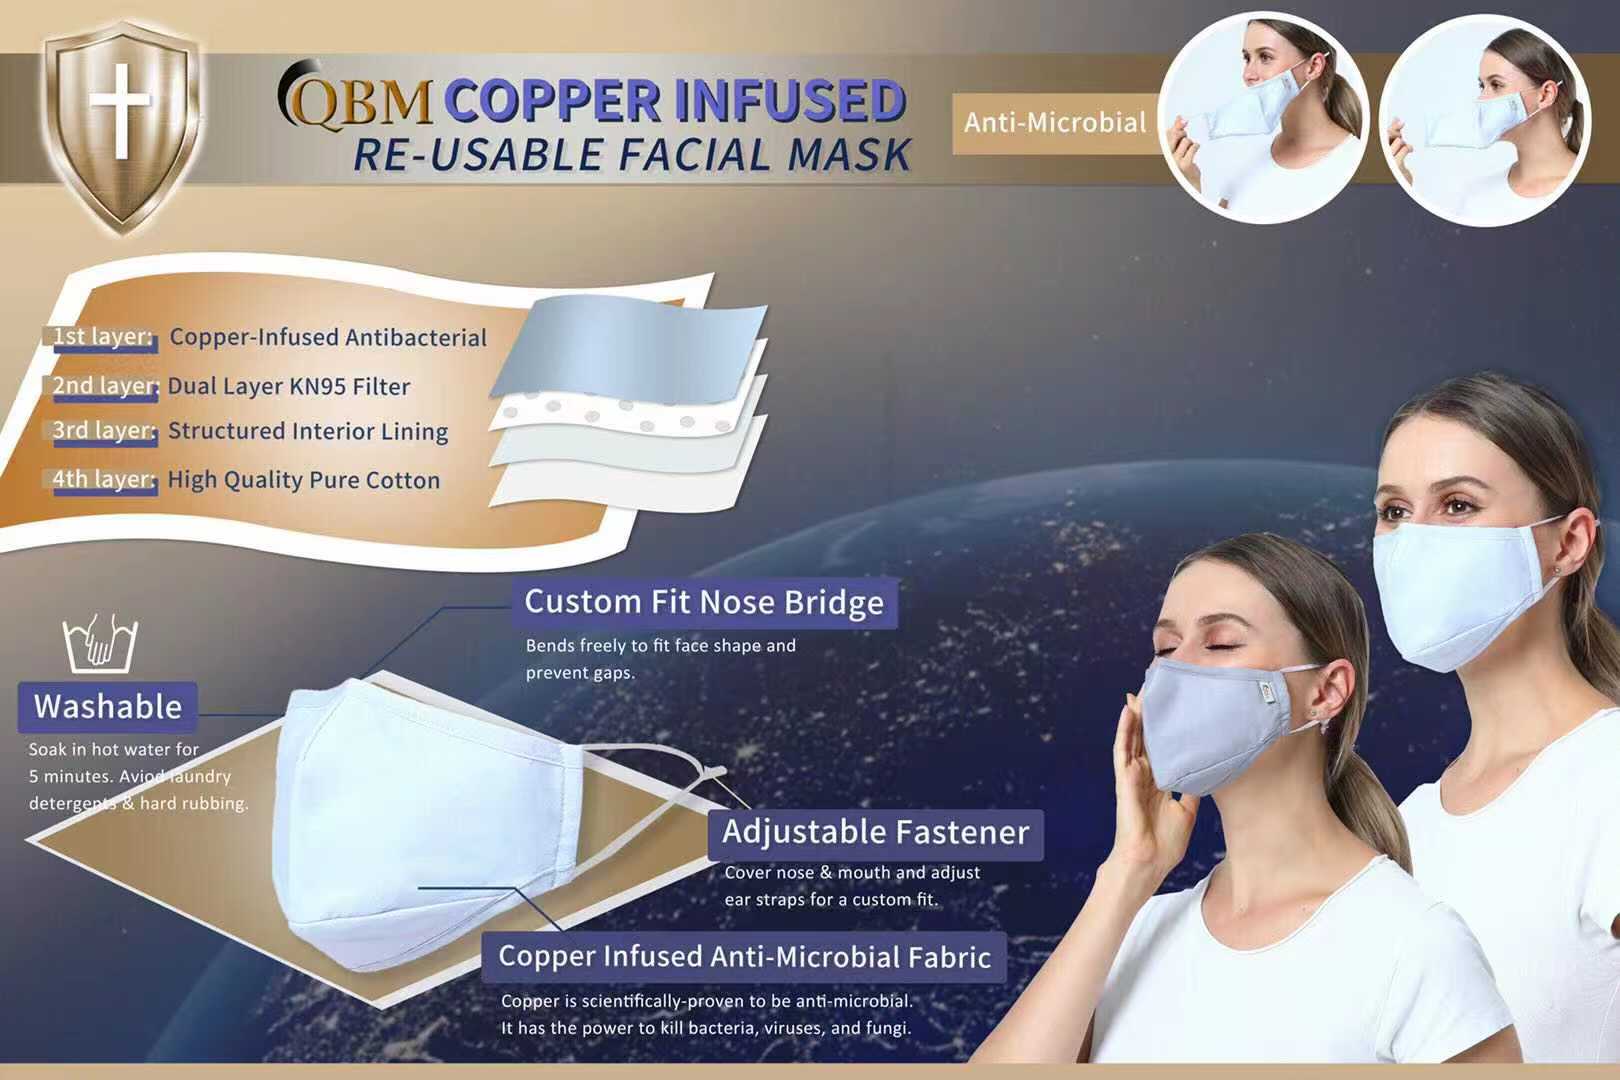 A circulating KN95 mask with antibacterial protection